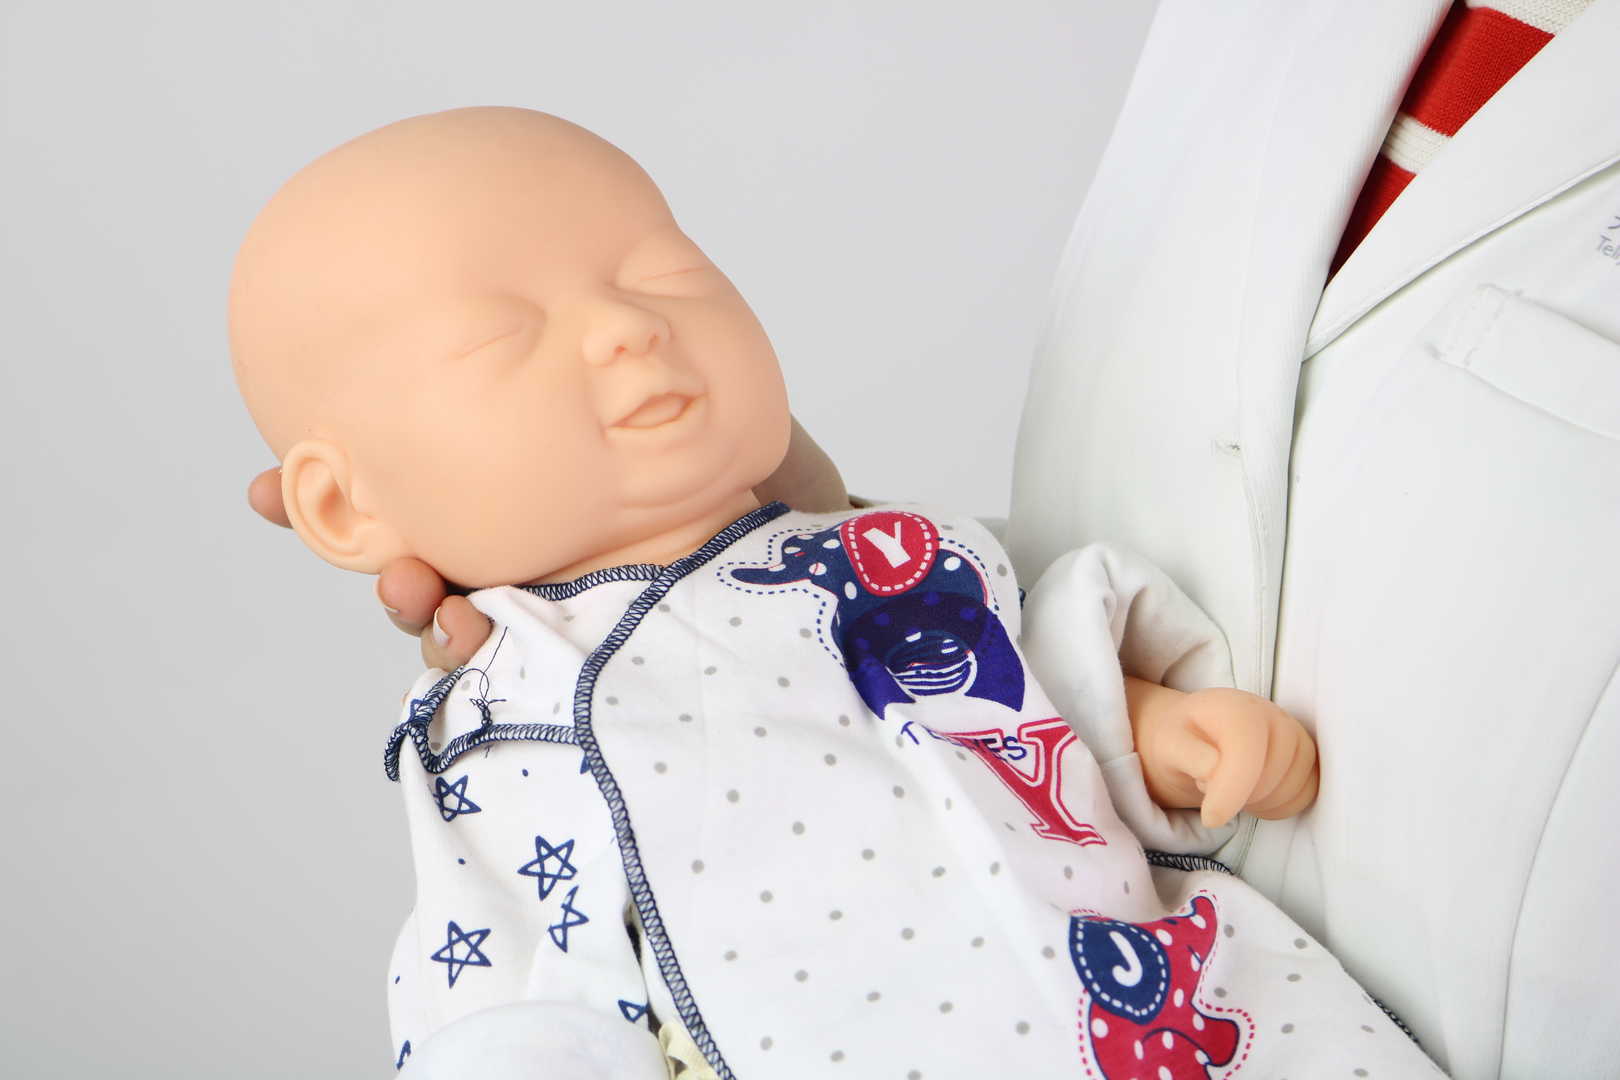 Evaluation and Care of Neonatal Manikin